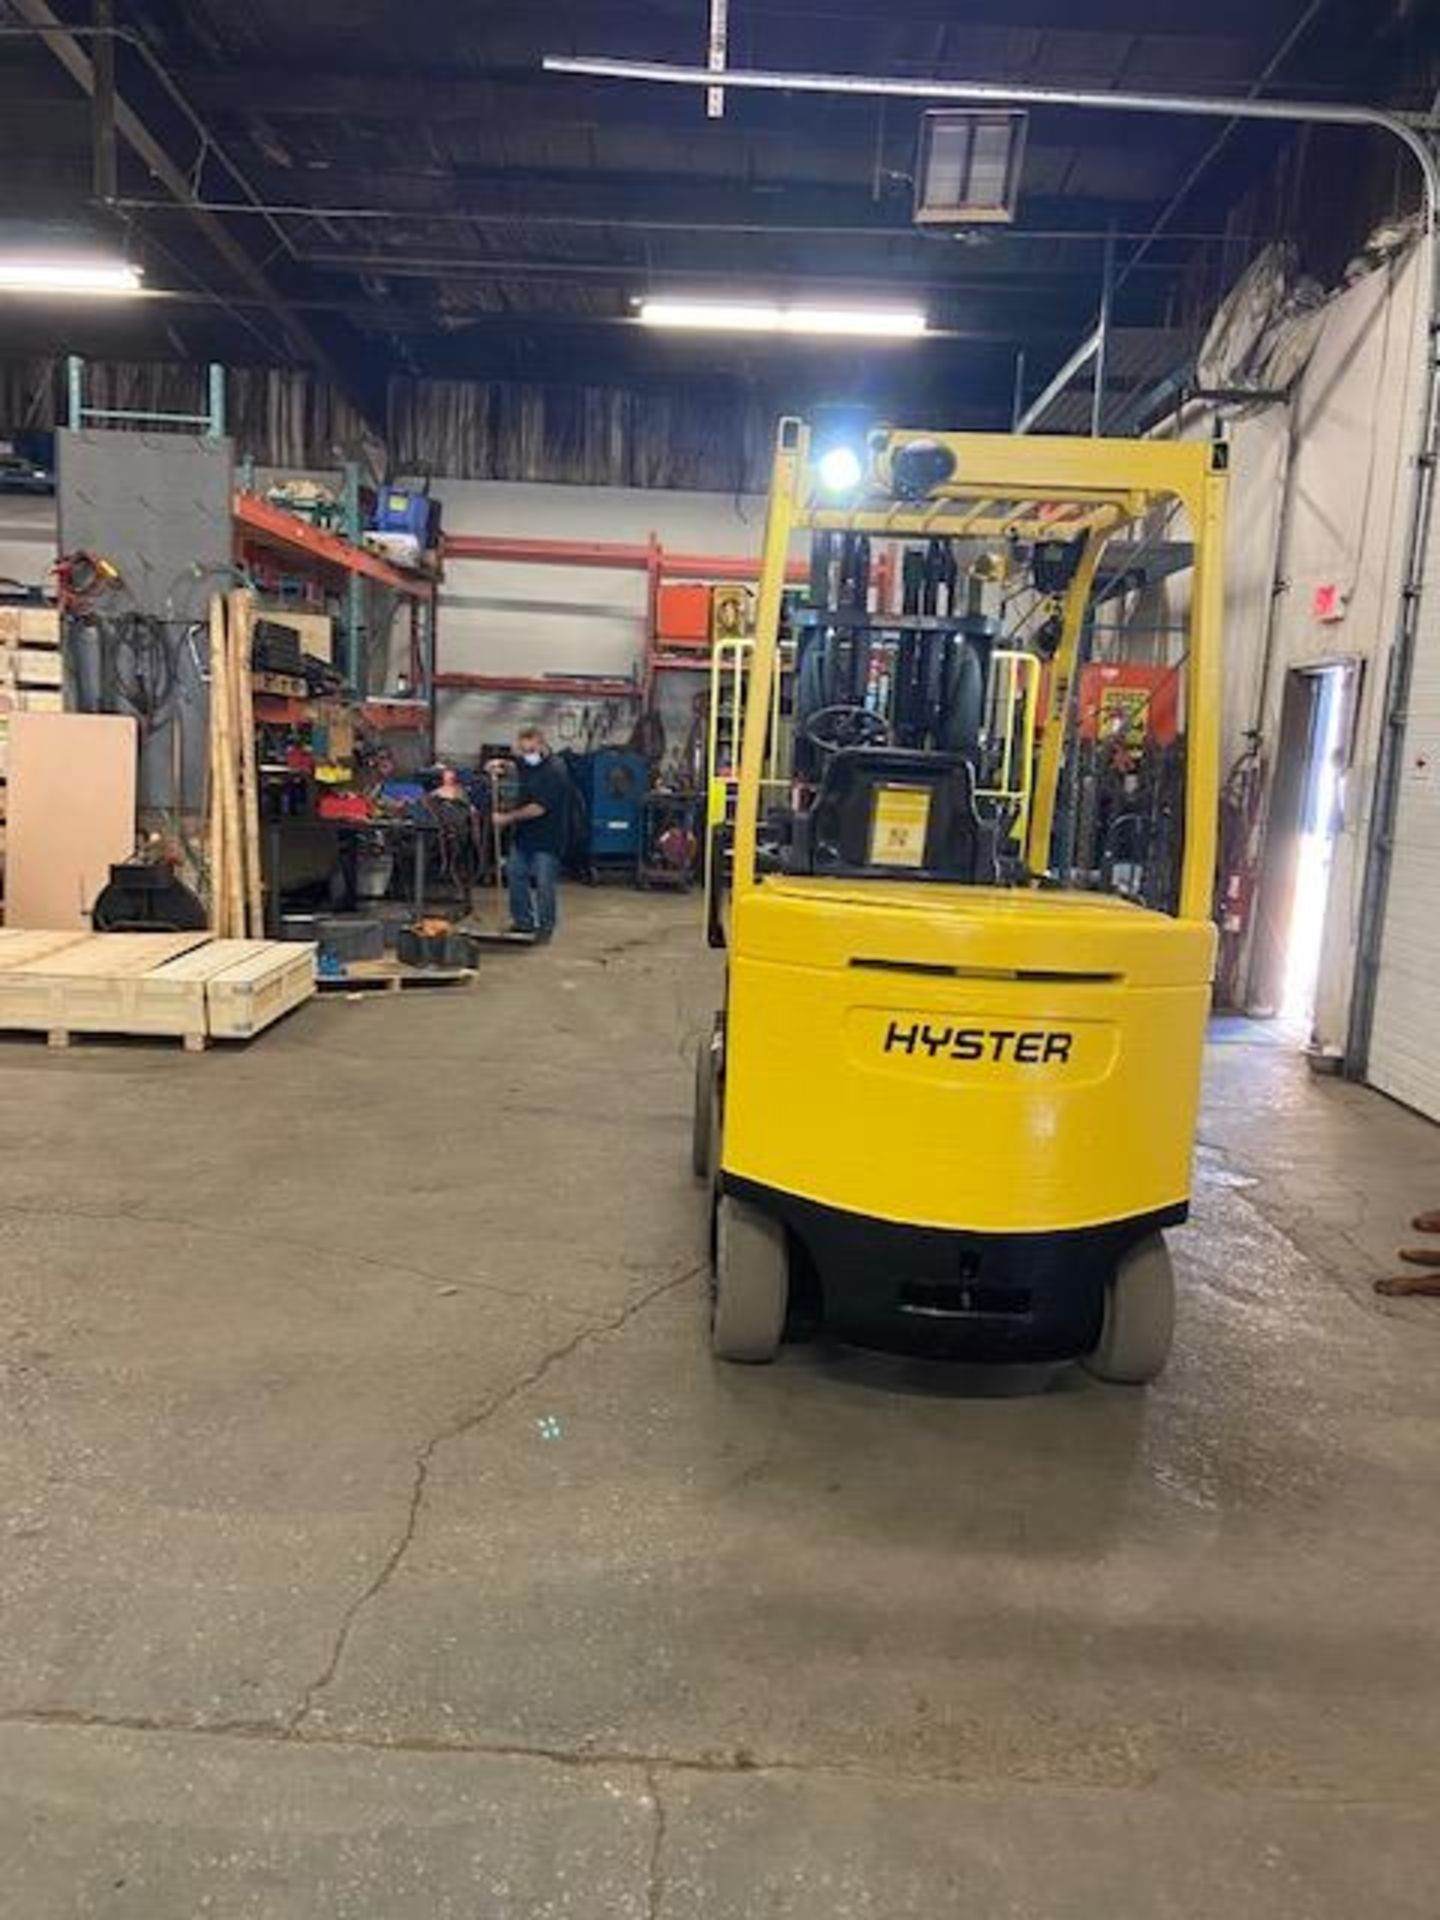 FREE CUSTOMS - 2014 Hyster 8000lbs Capacity Forklift Electric with sideshift NICE UNIT - Image 3 of 3